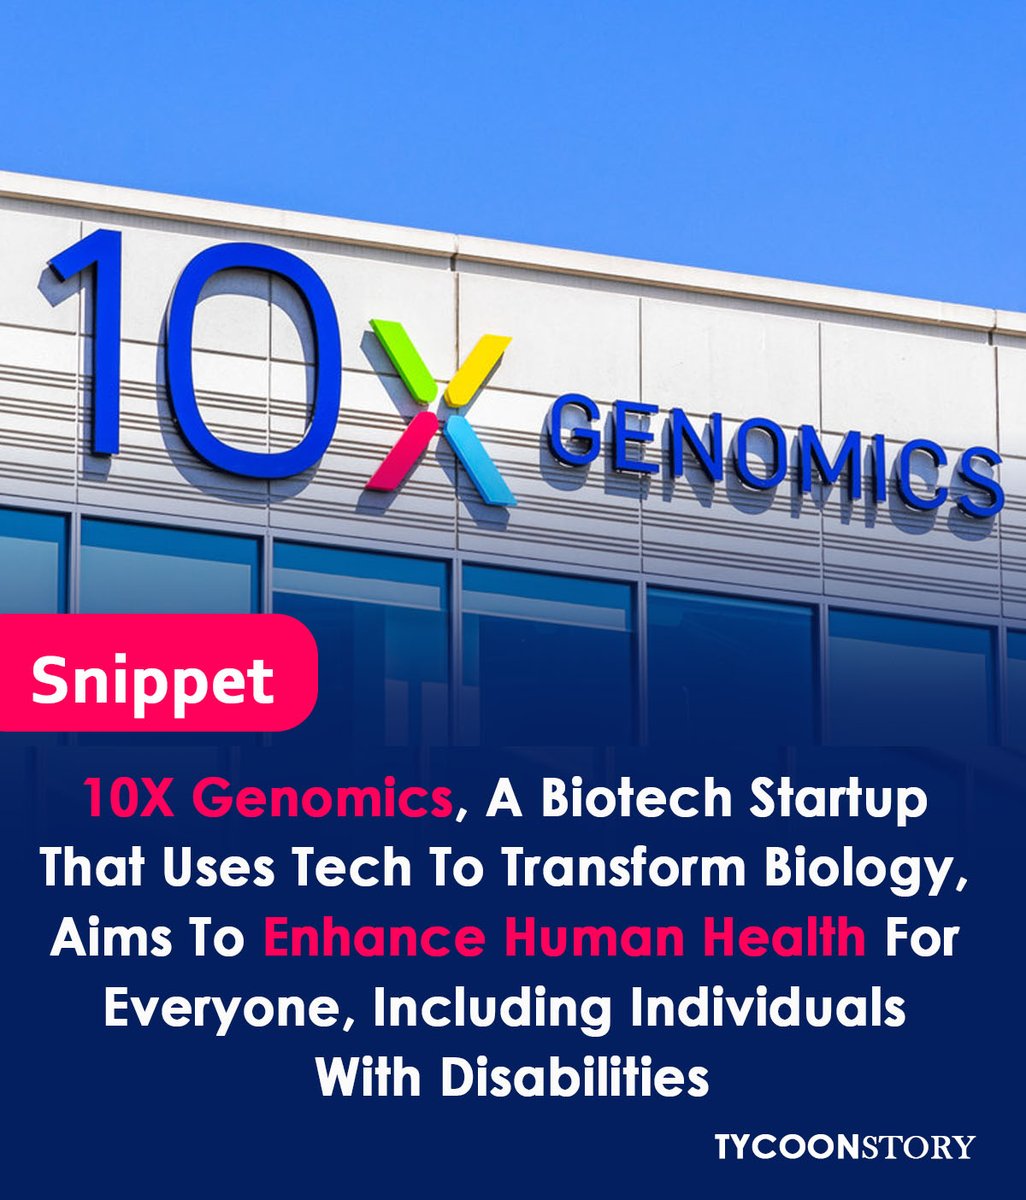 Biotech startup 10X Genomics utilizes tech to reshape biology and Advance Human Health for everyone, including individuals with disabilities

#biotechstartup #biotechnology #humanhealth #scienceinnovation #cancercare #DisabilityTech  #ResearchInnovation @10xGenomics